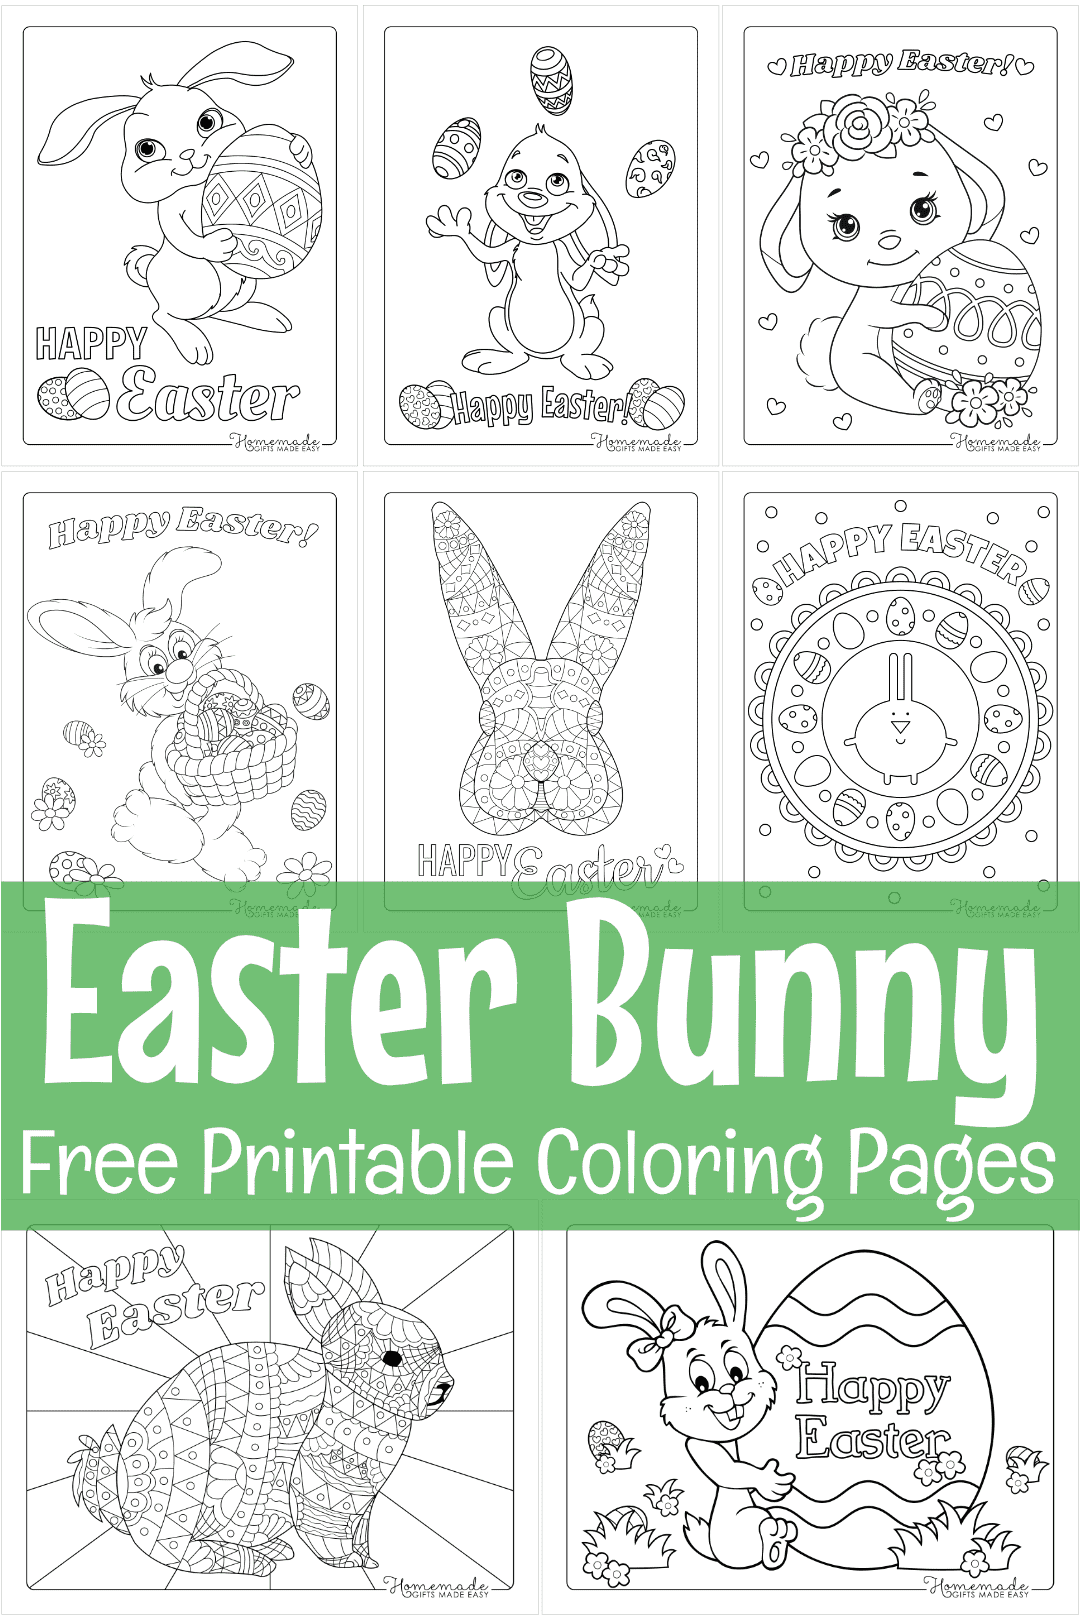 Free printable Easter bunny coloring pages